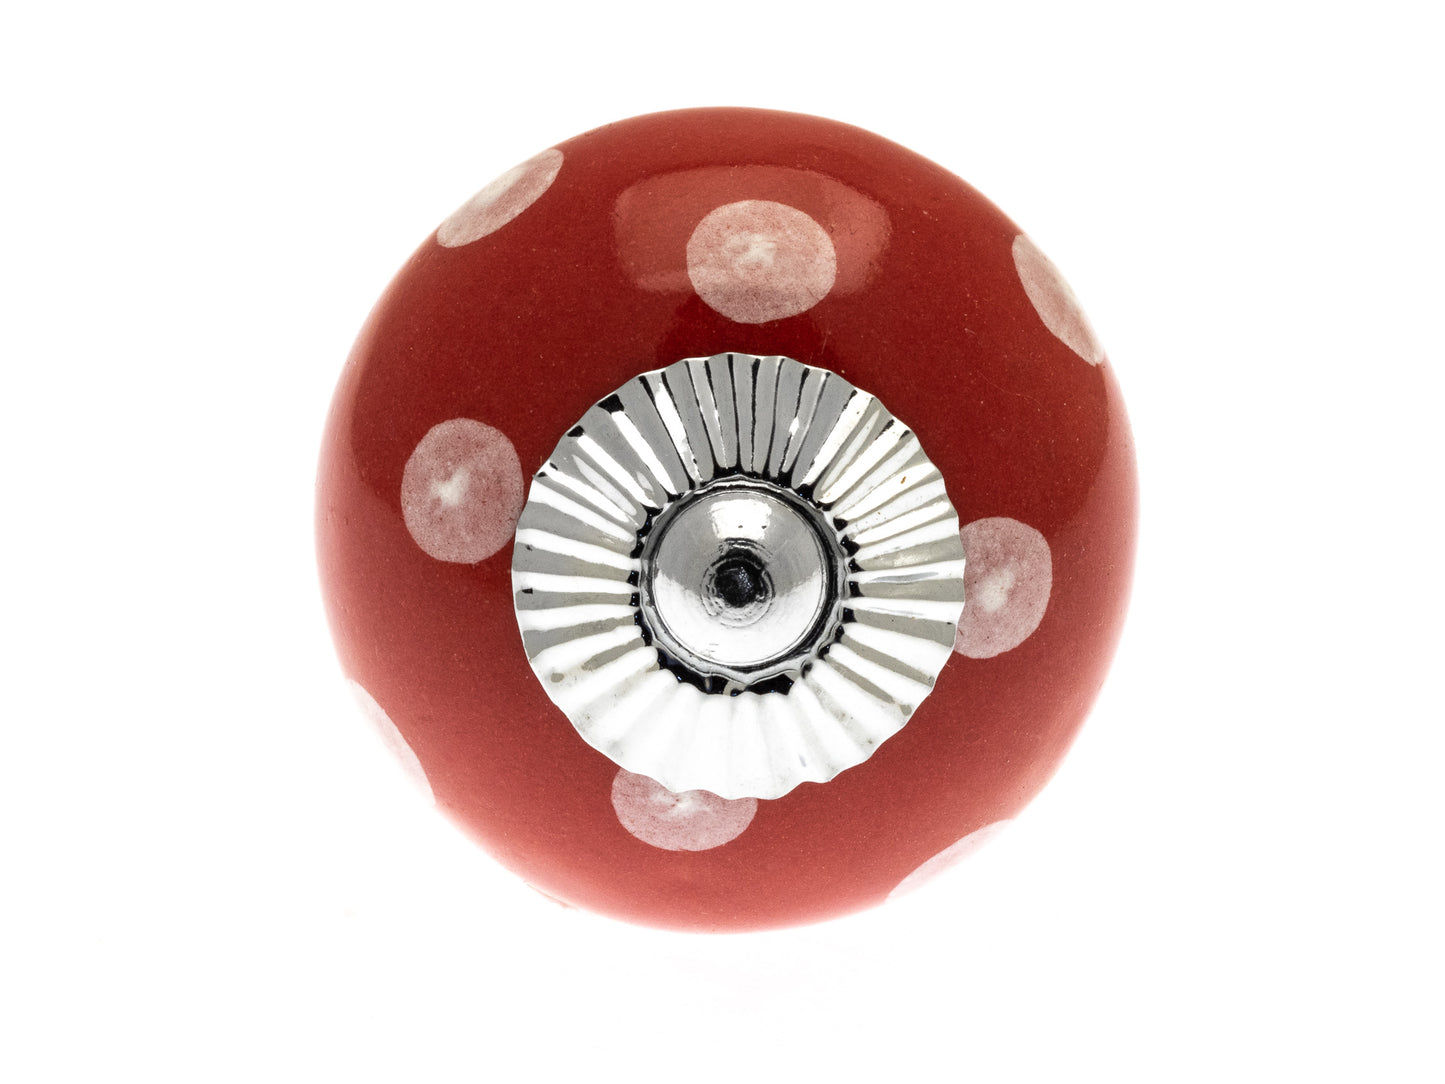 Round Ceramic Knob Red with White Spots / Polka Dots 40mm